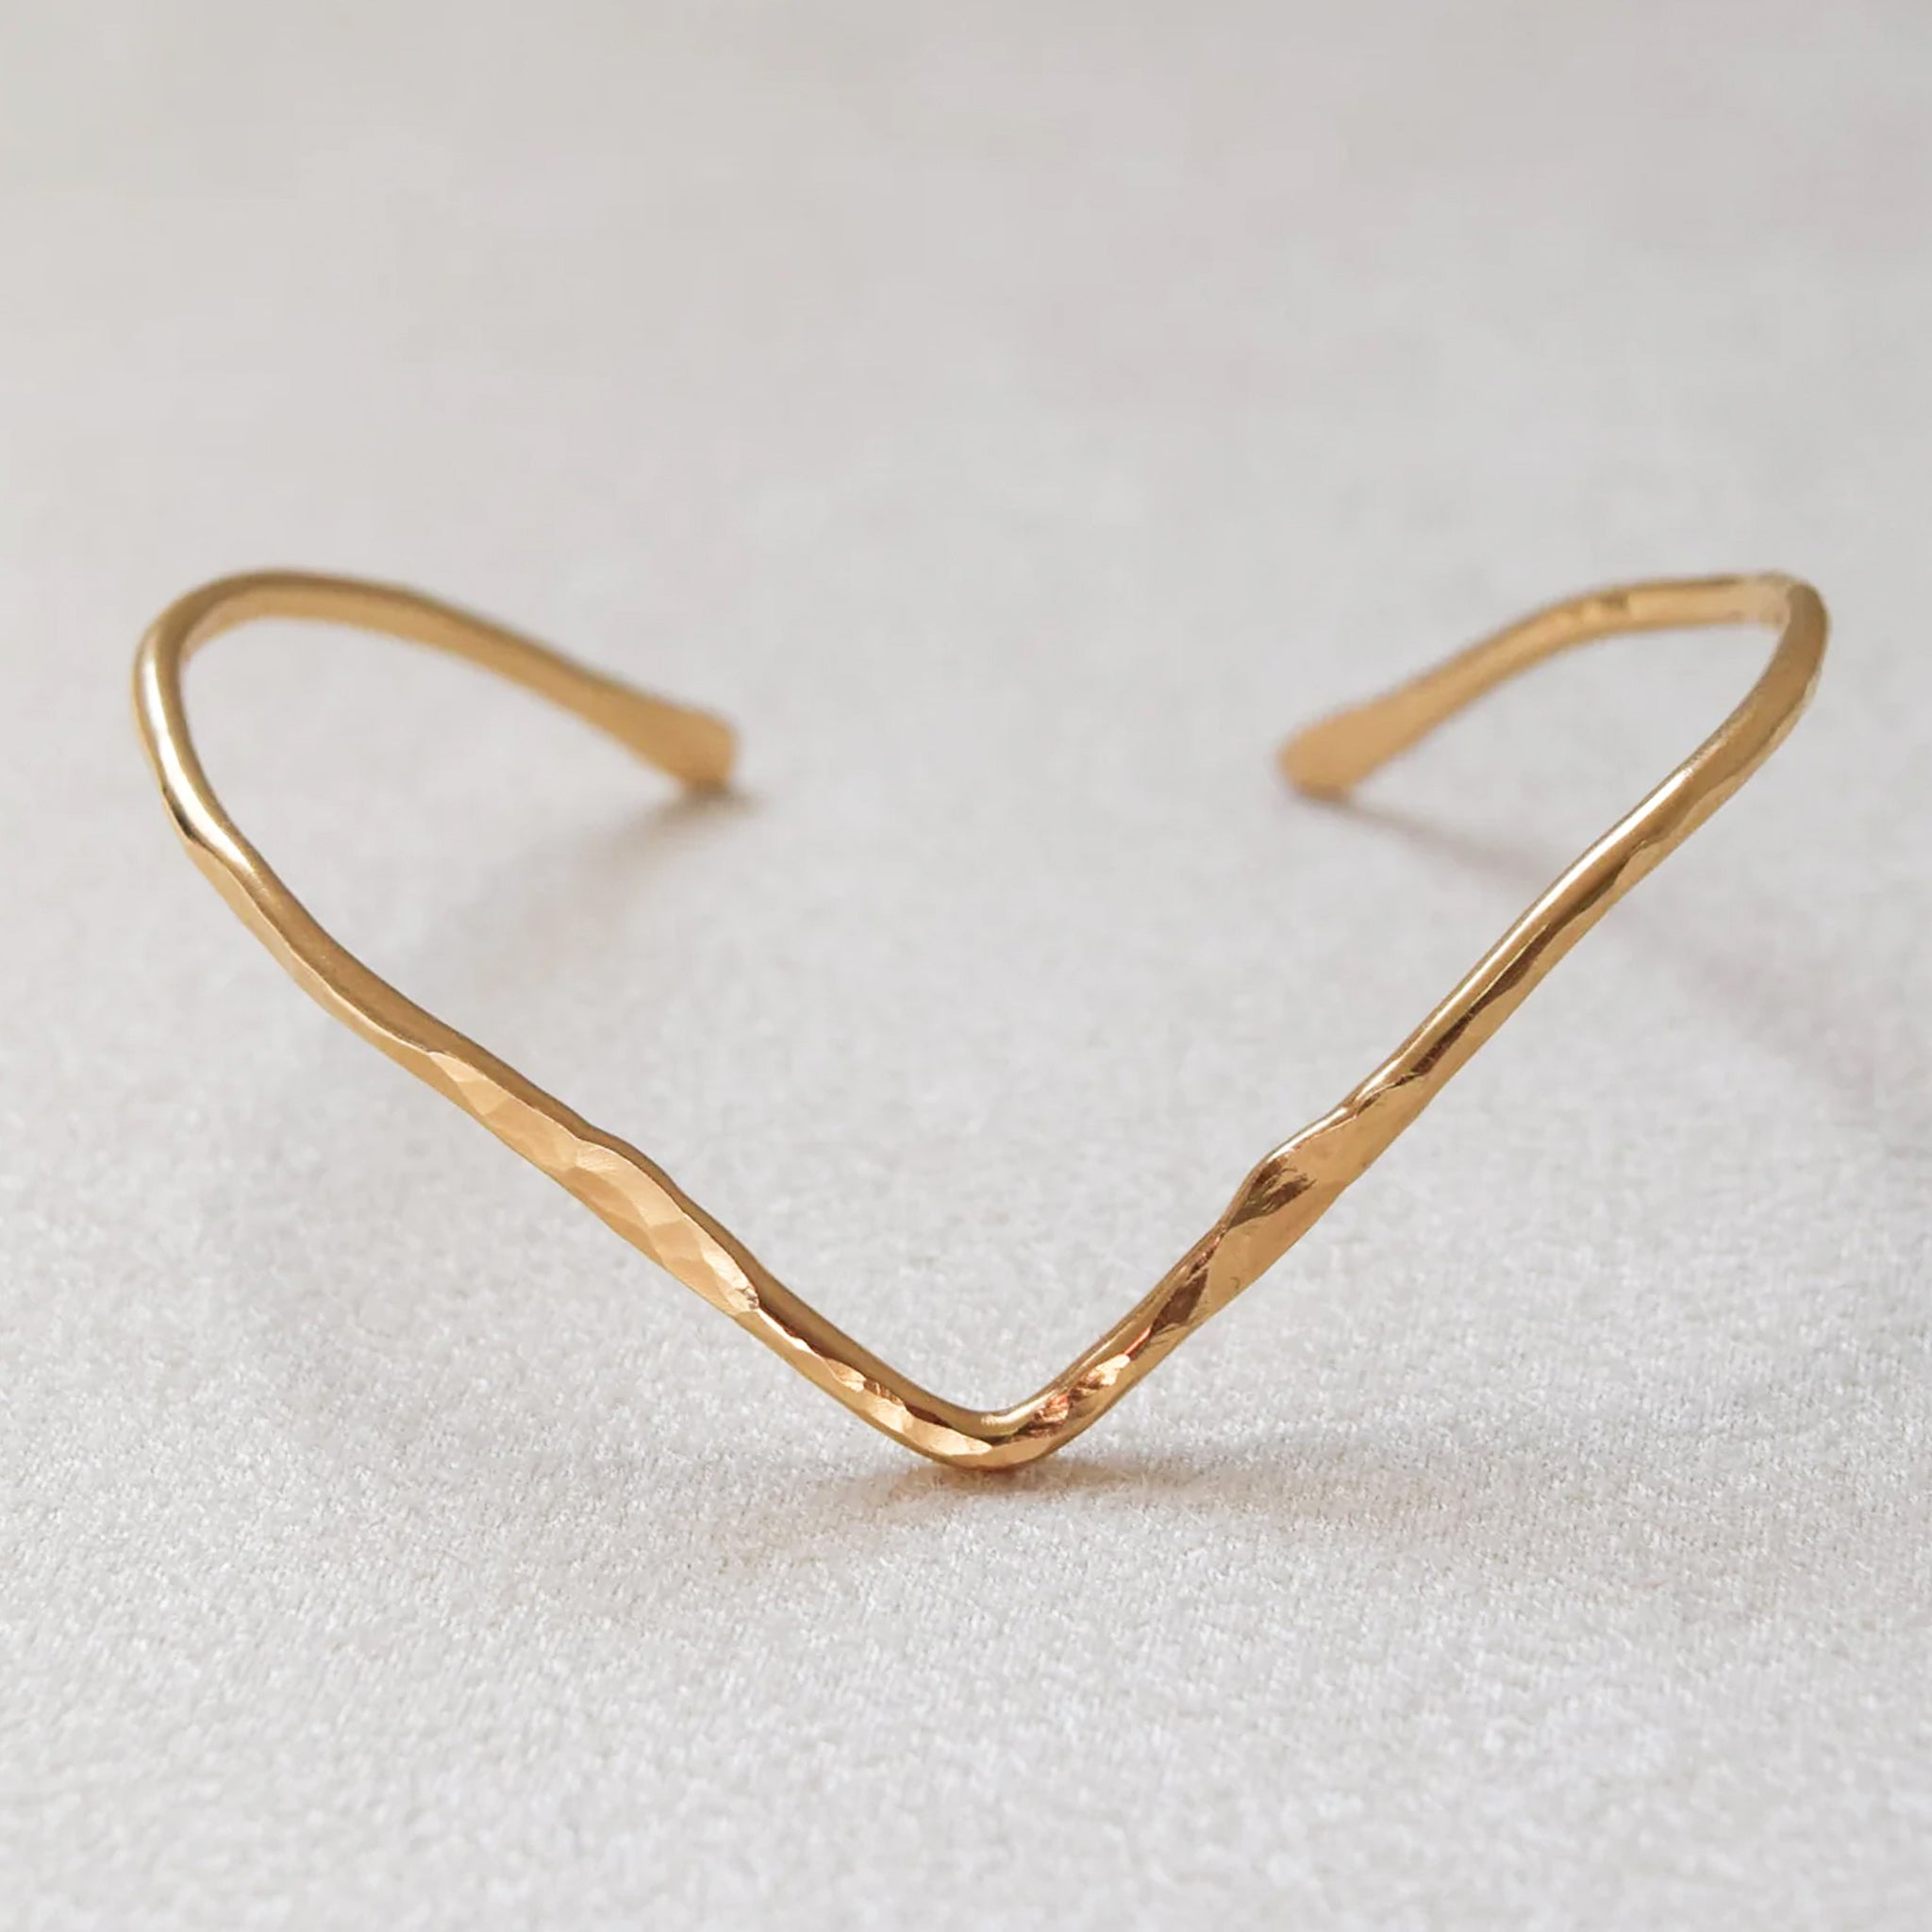 A gold hammered cuff bracelet with a pointed shape. 